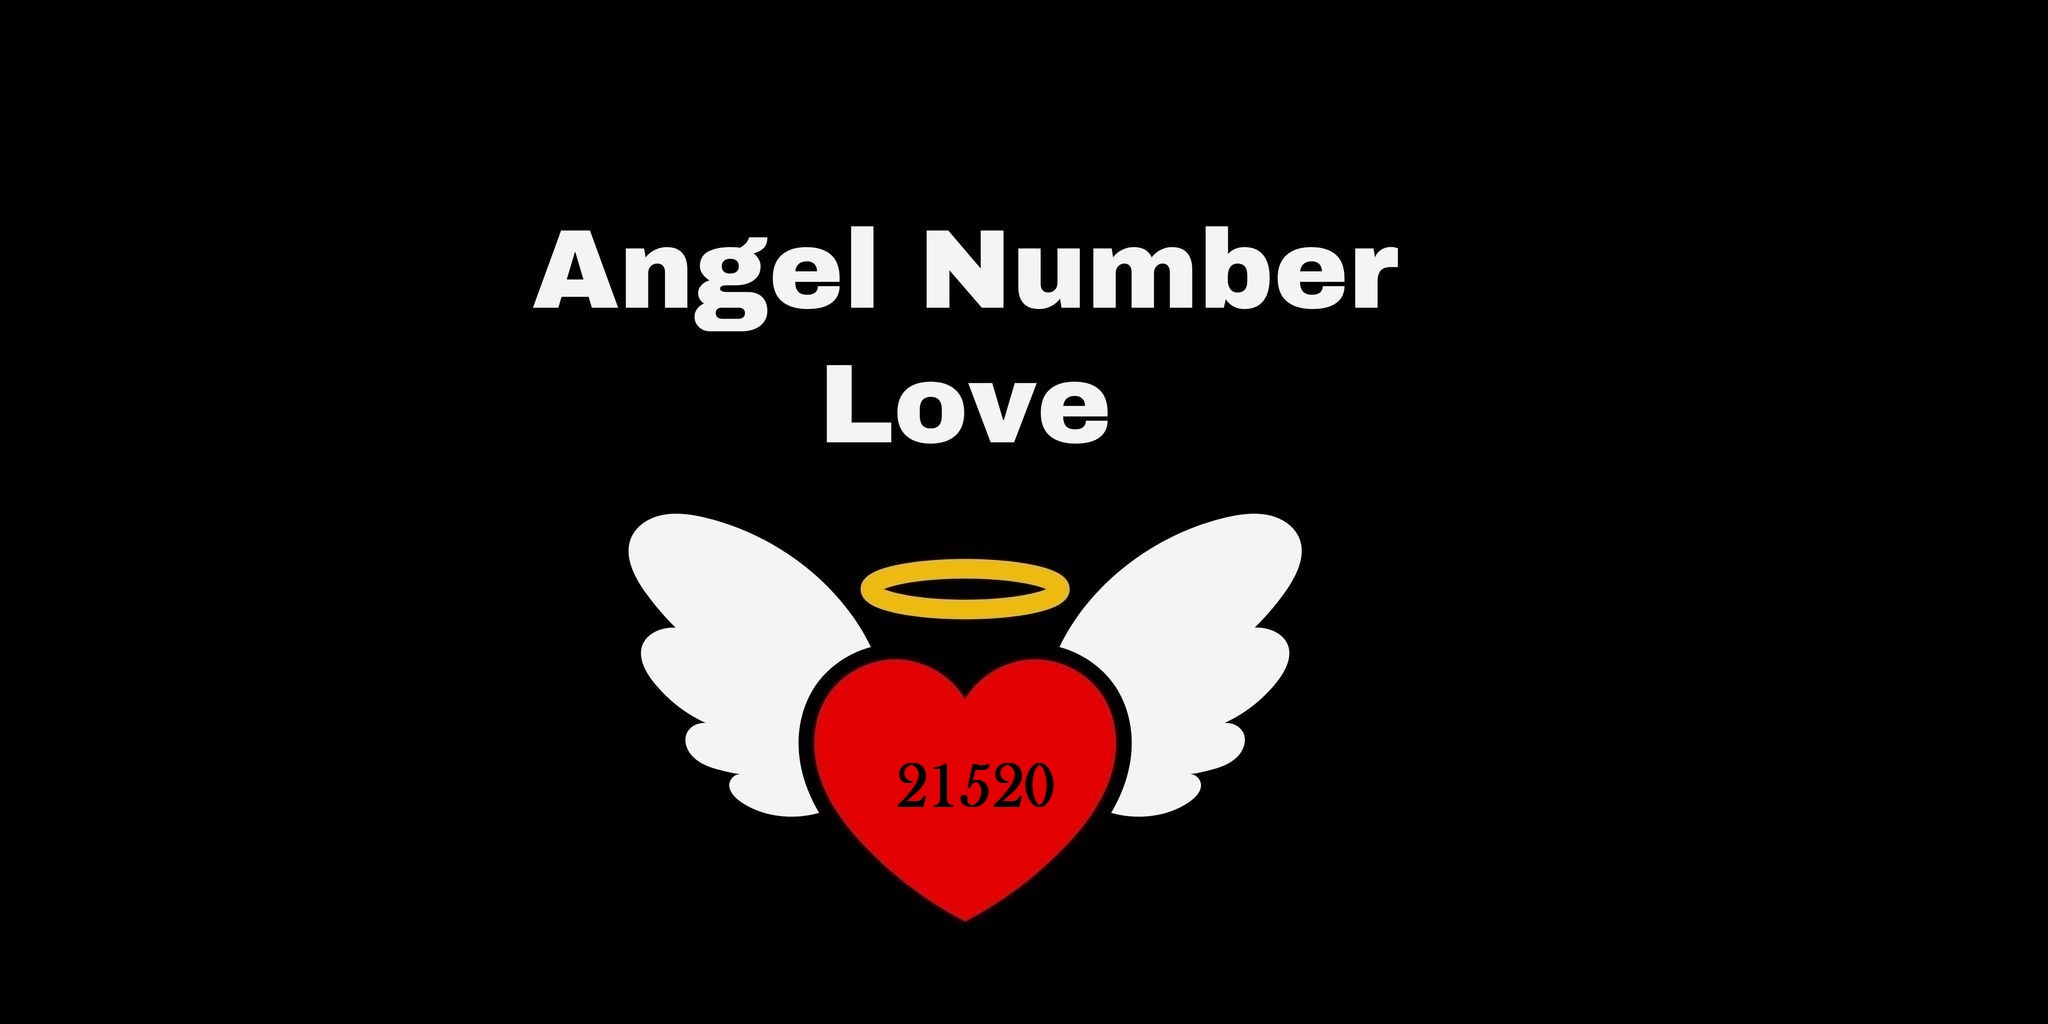 21520 Angel Number Meaning In Love